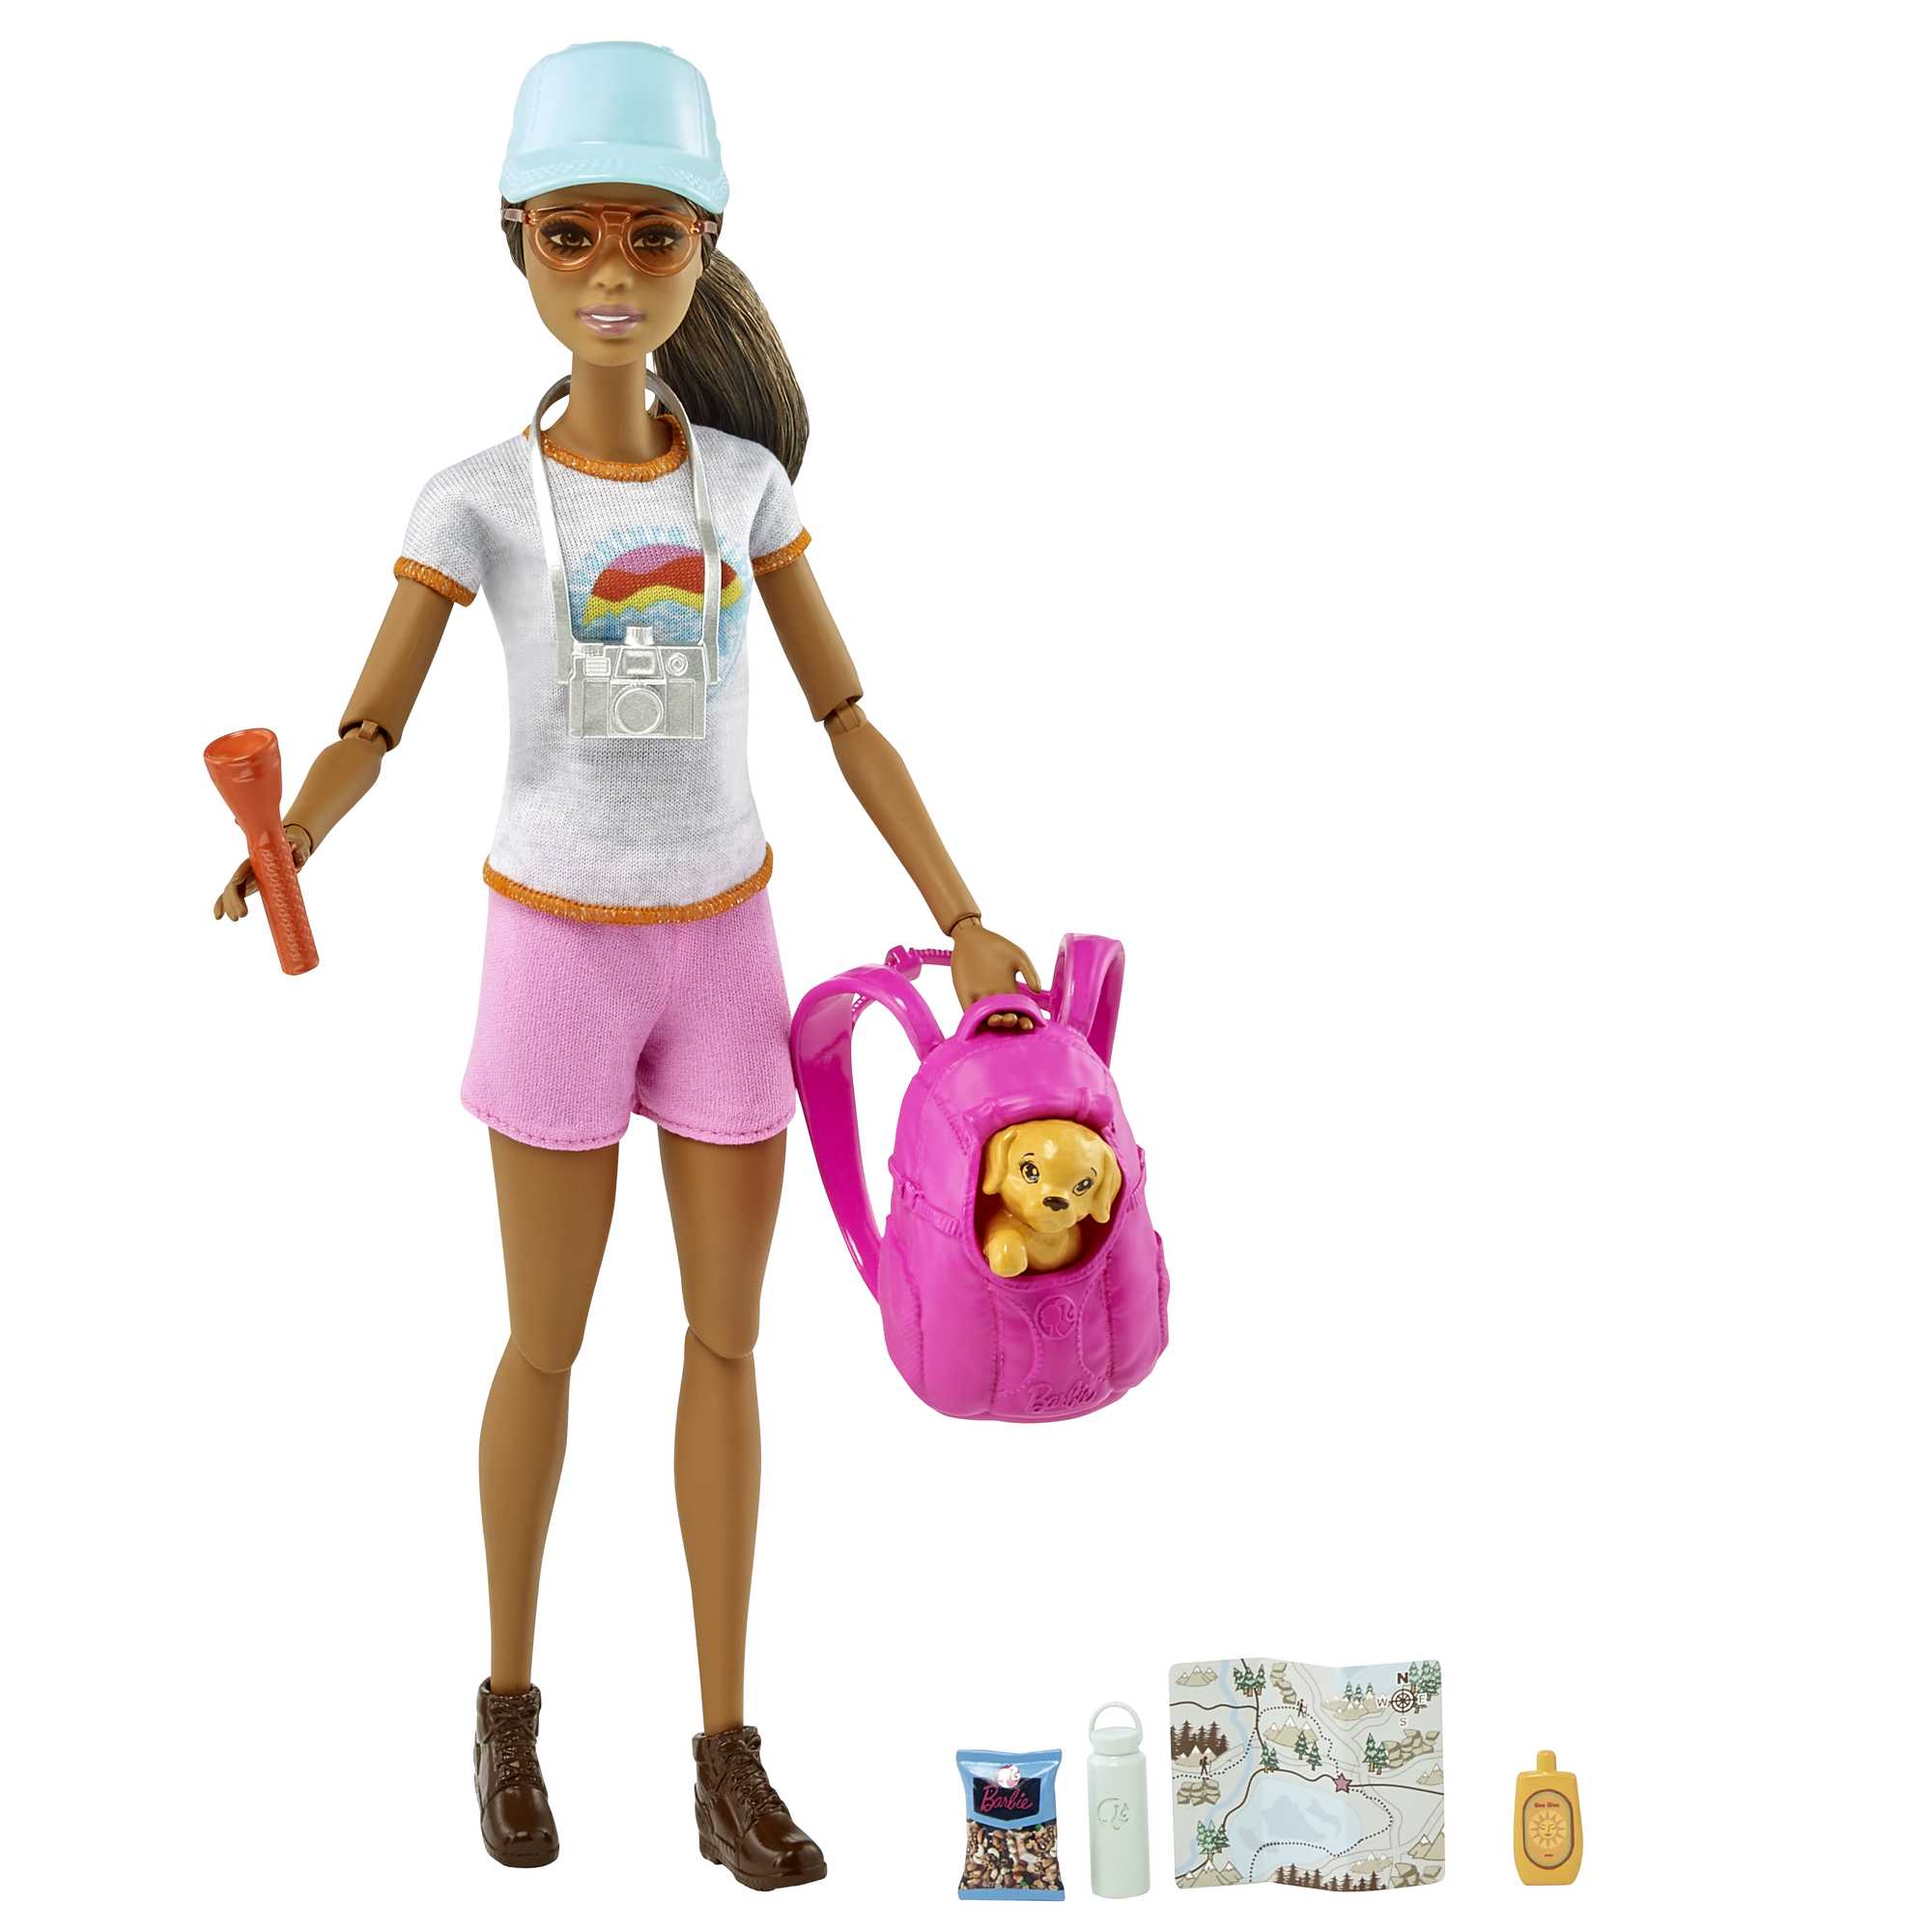 Mega Barbie Toy Building Set, Farmer's Market with 3 Barbie Micro-Dolls, 4  Barbie Pets and Accessories, Easy to Build Set for Ages 4 and Up